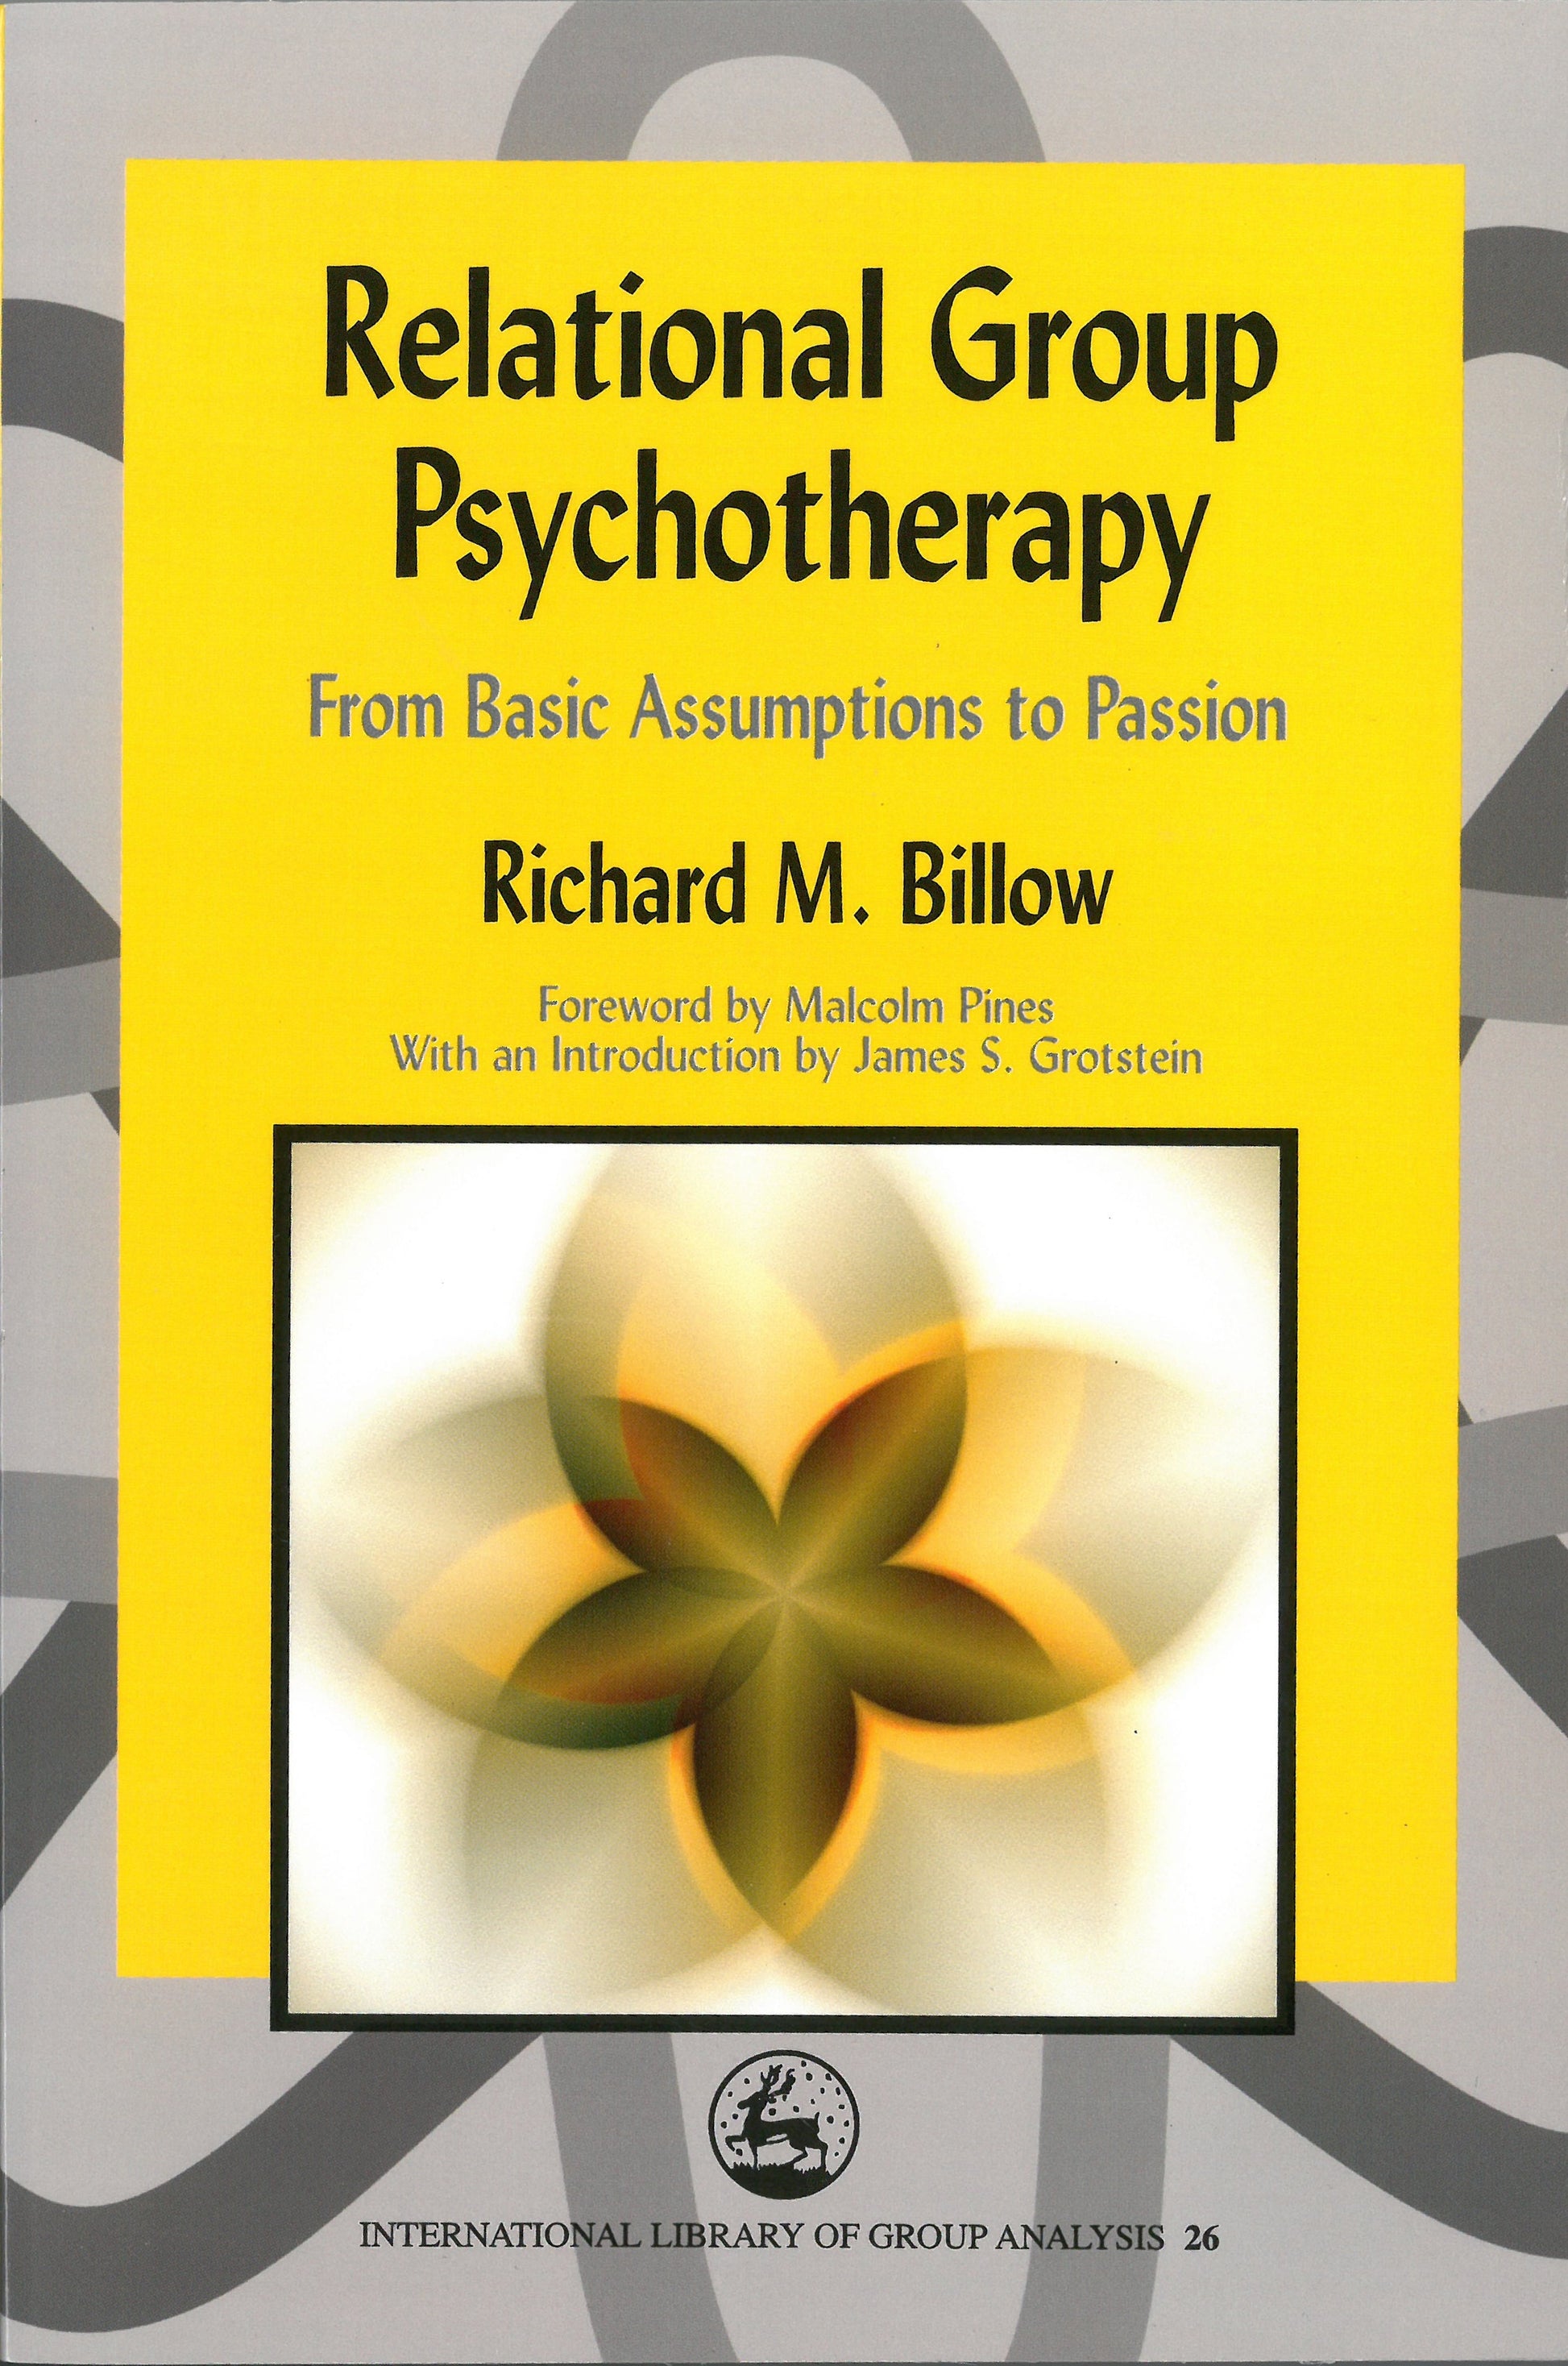 Relational Group Psychotherapy by Richard Billow, Malcolm Pines